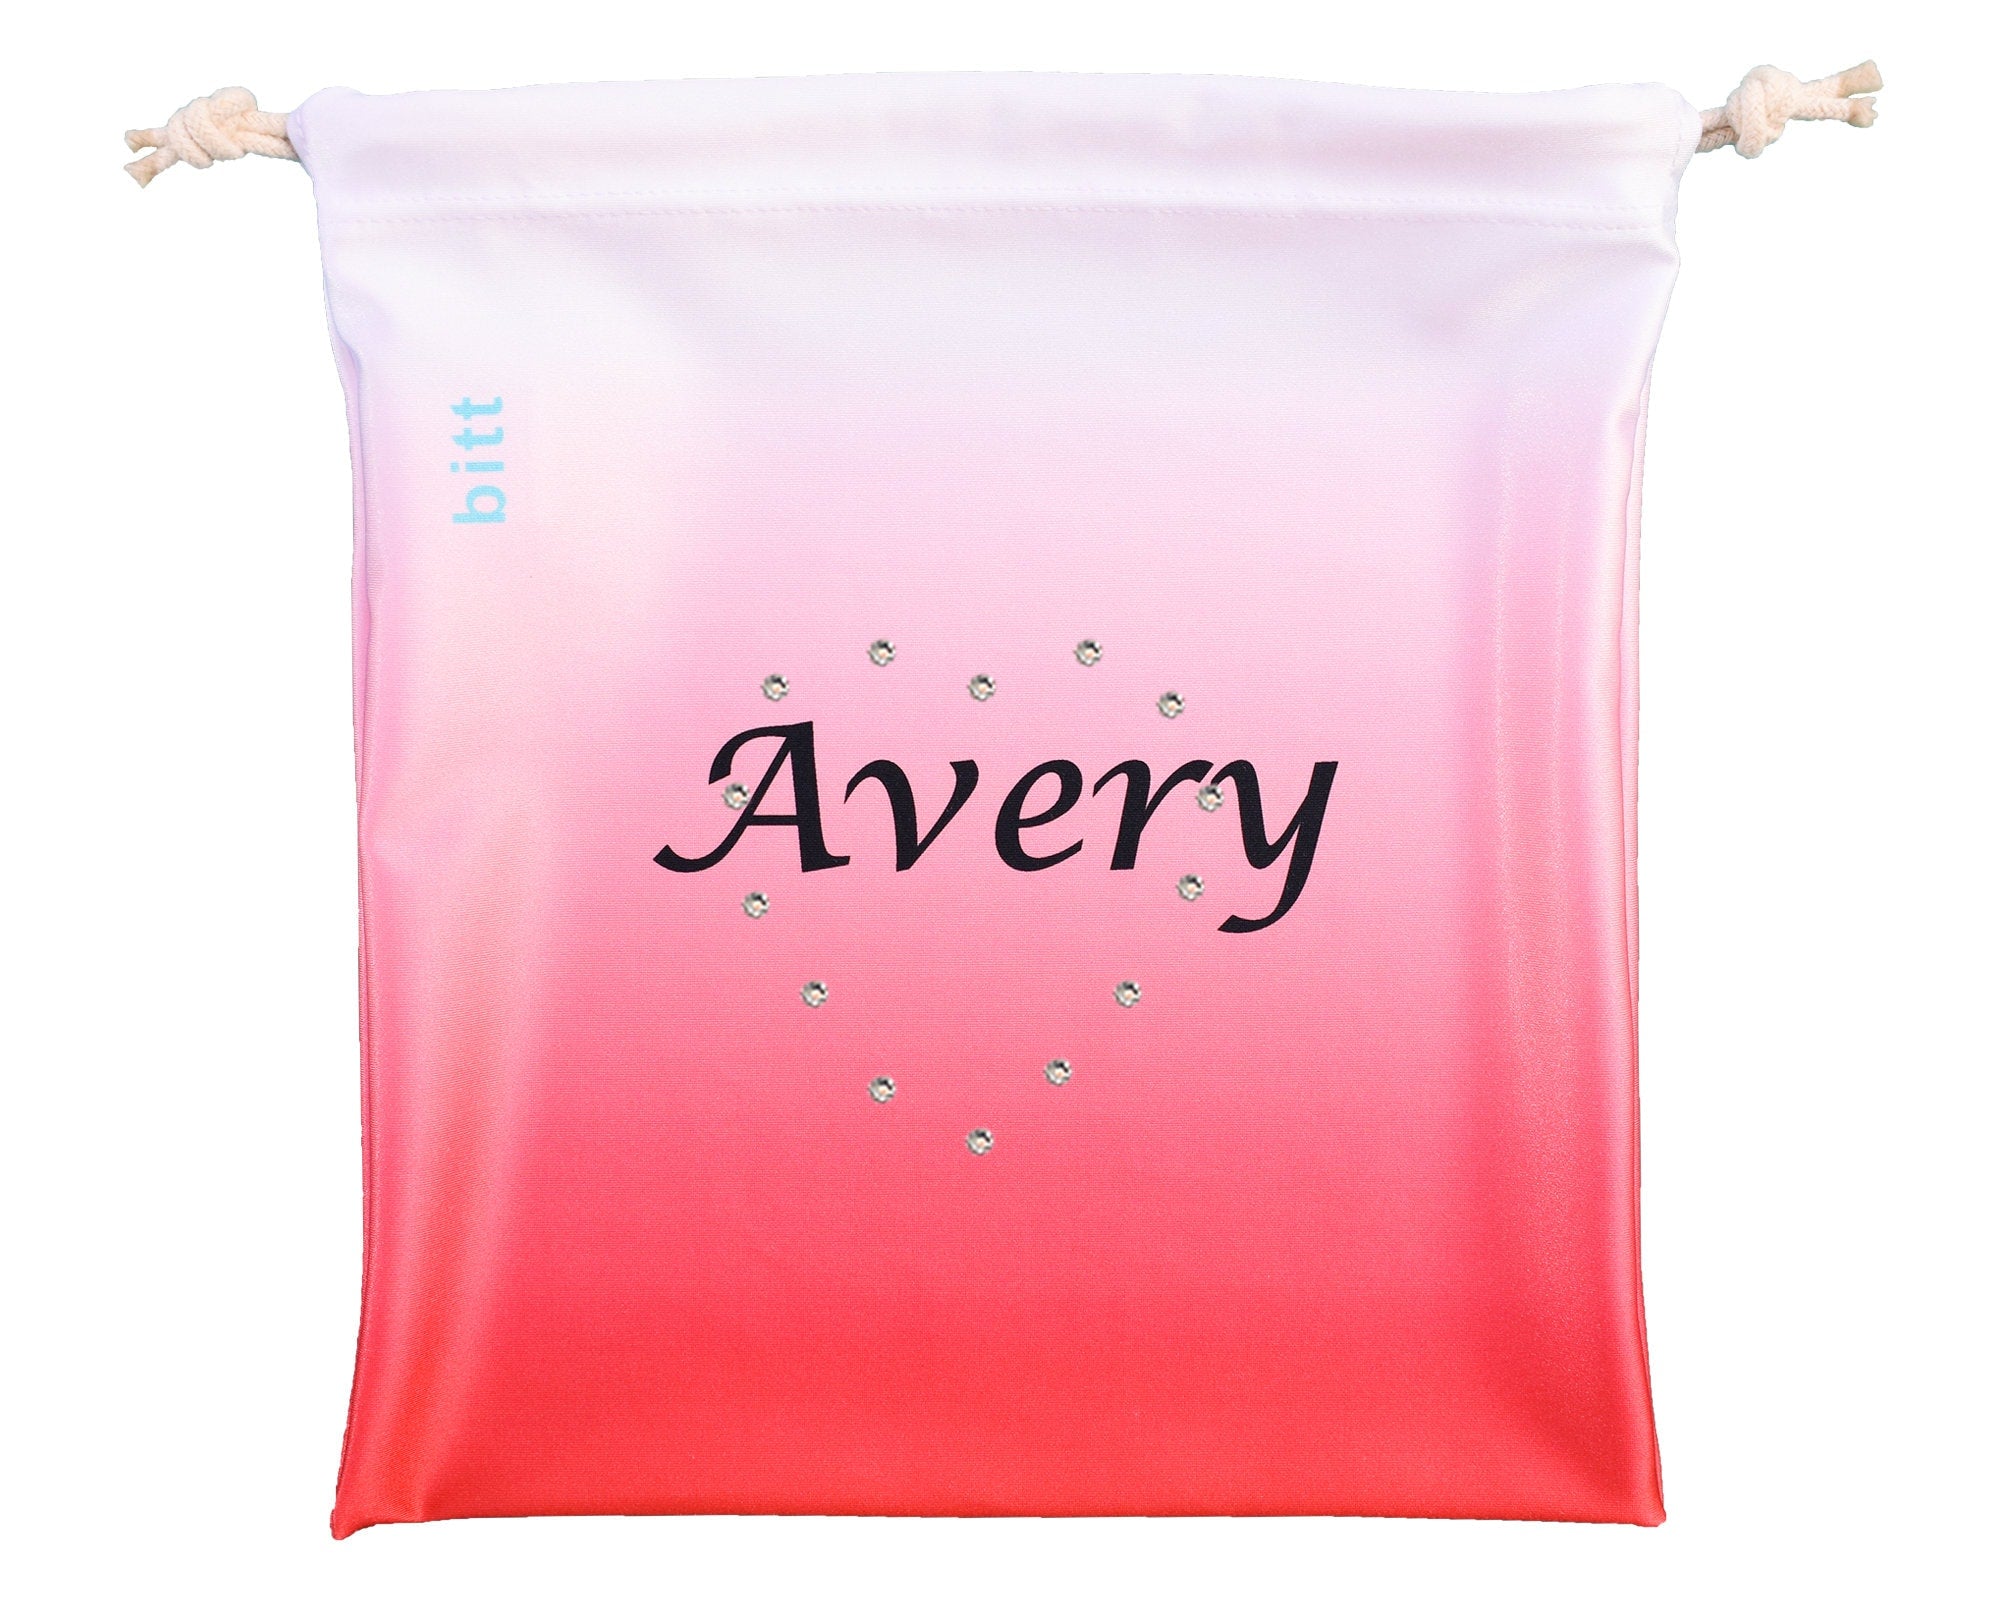 Personalized Gymnastics Grip Bag in Red & White Ombre